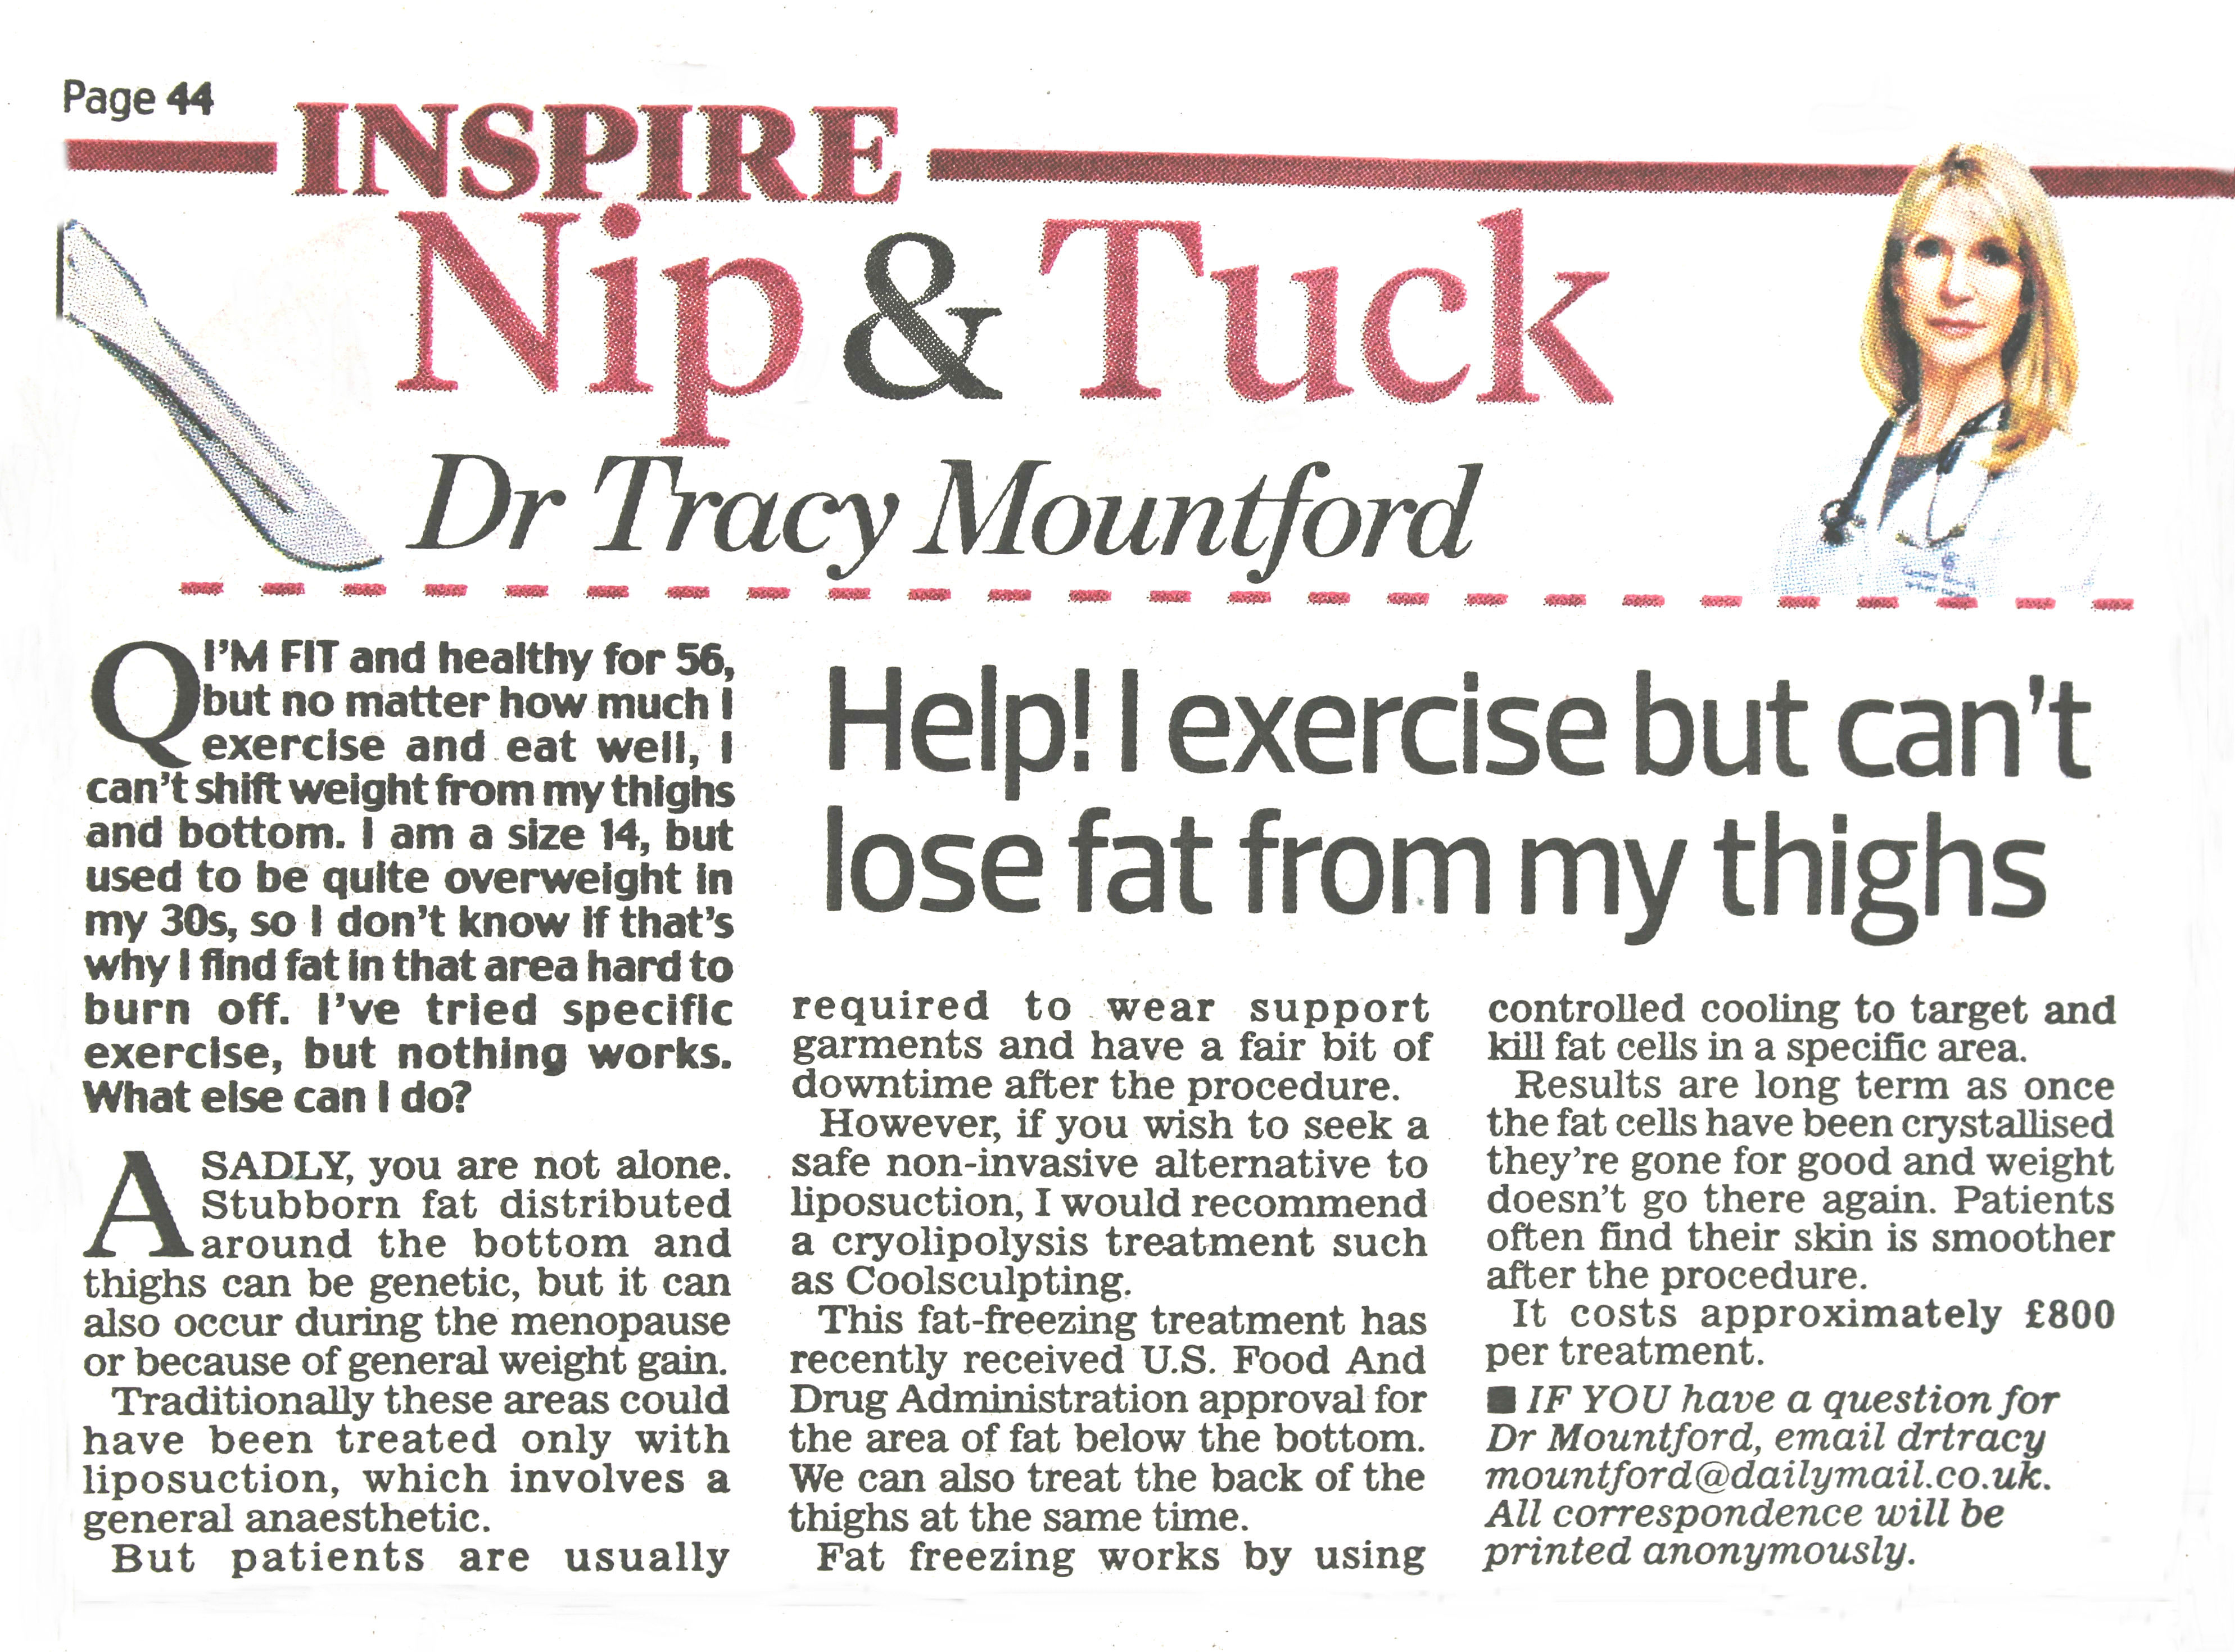 daily-mail-nip-and-tuck-17-October-2016-dr-tracy-mountford-non-surgical cosmetic treatments